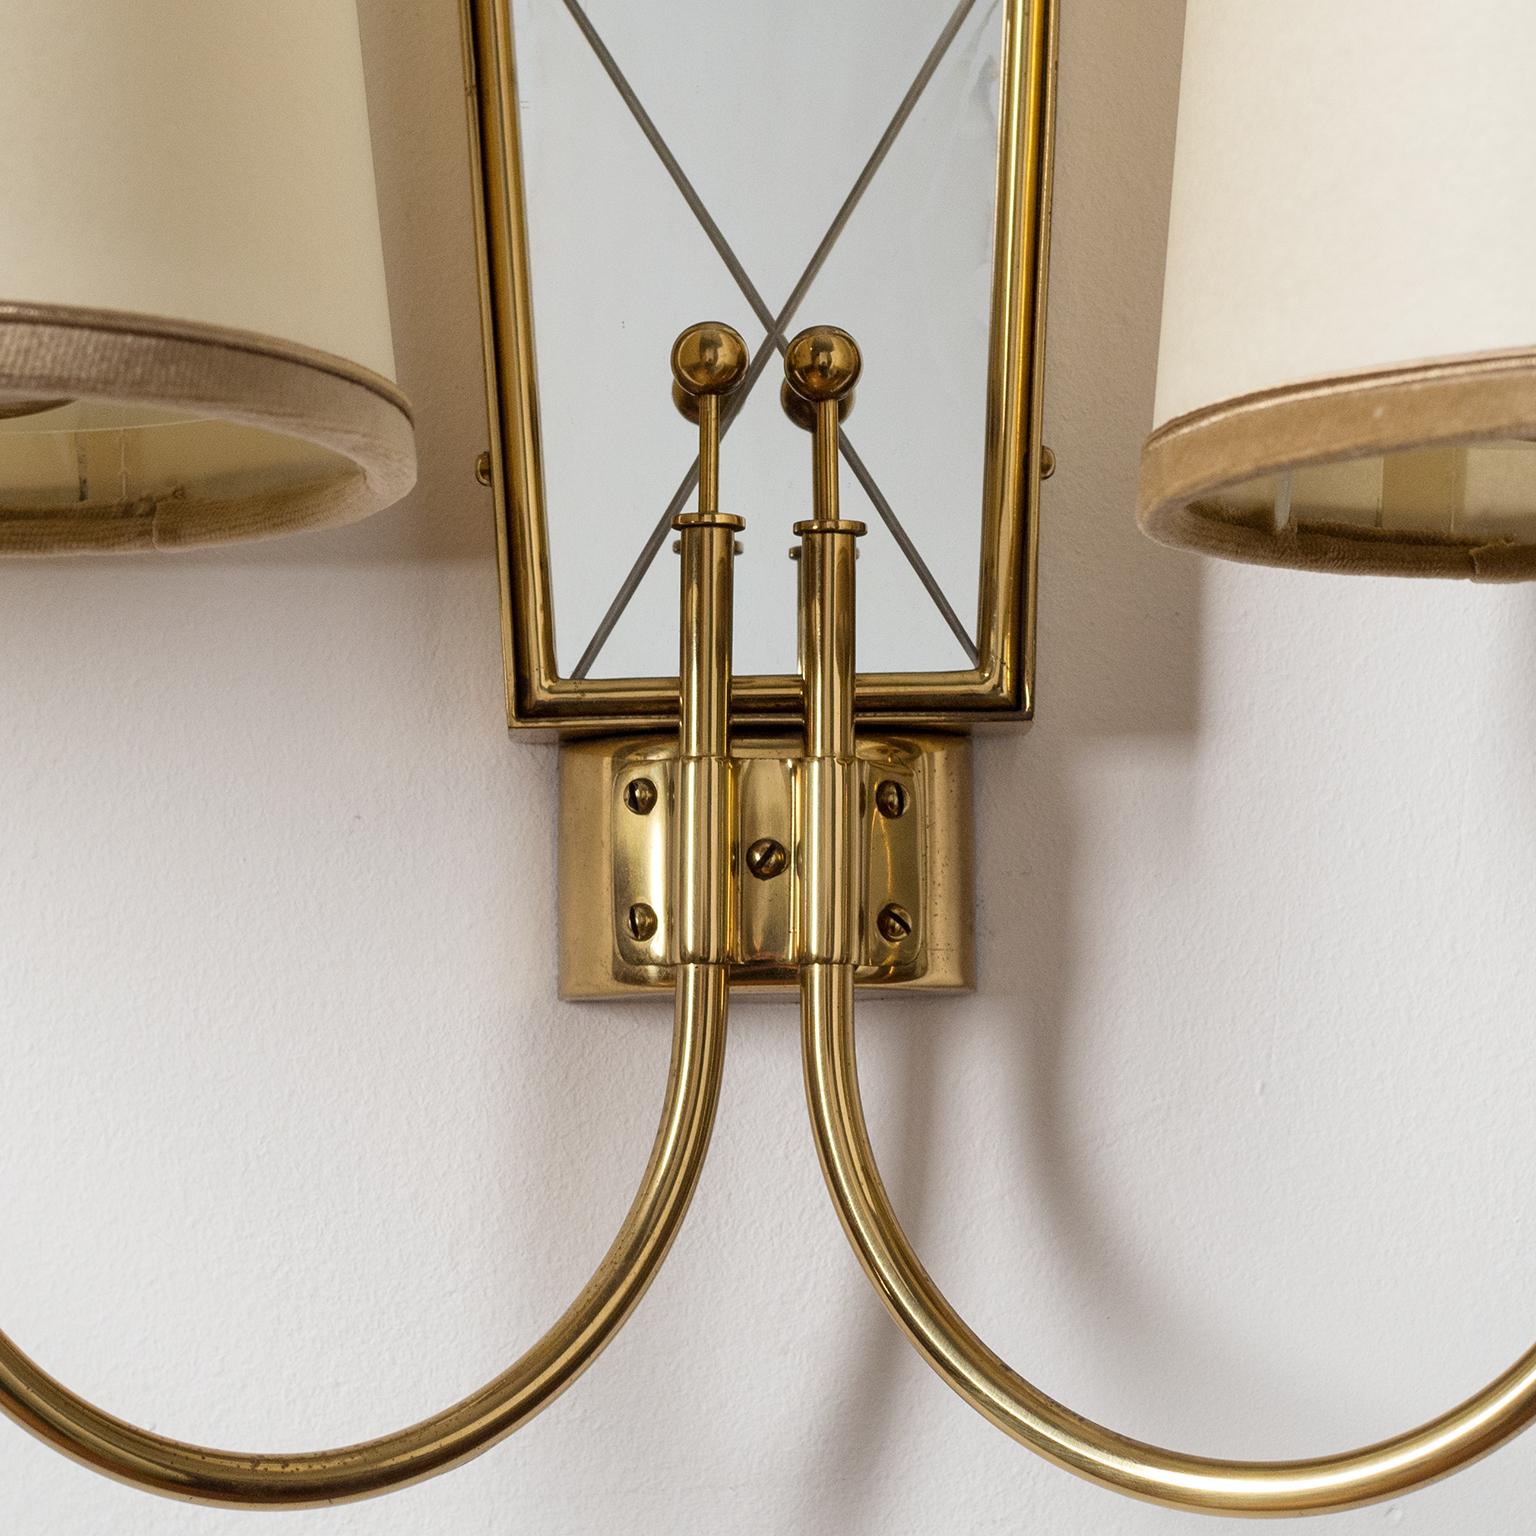 Mirror Large Dual-Arm Brass Wall Lights, 1940s